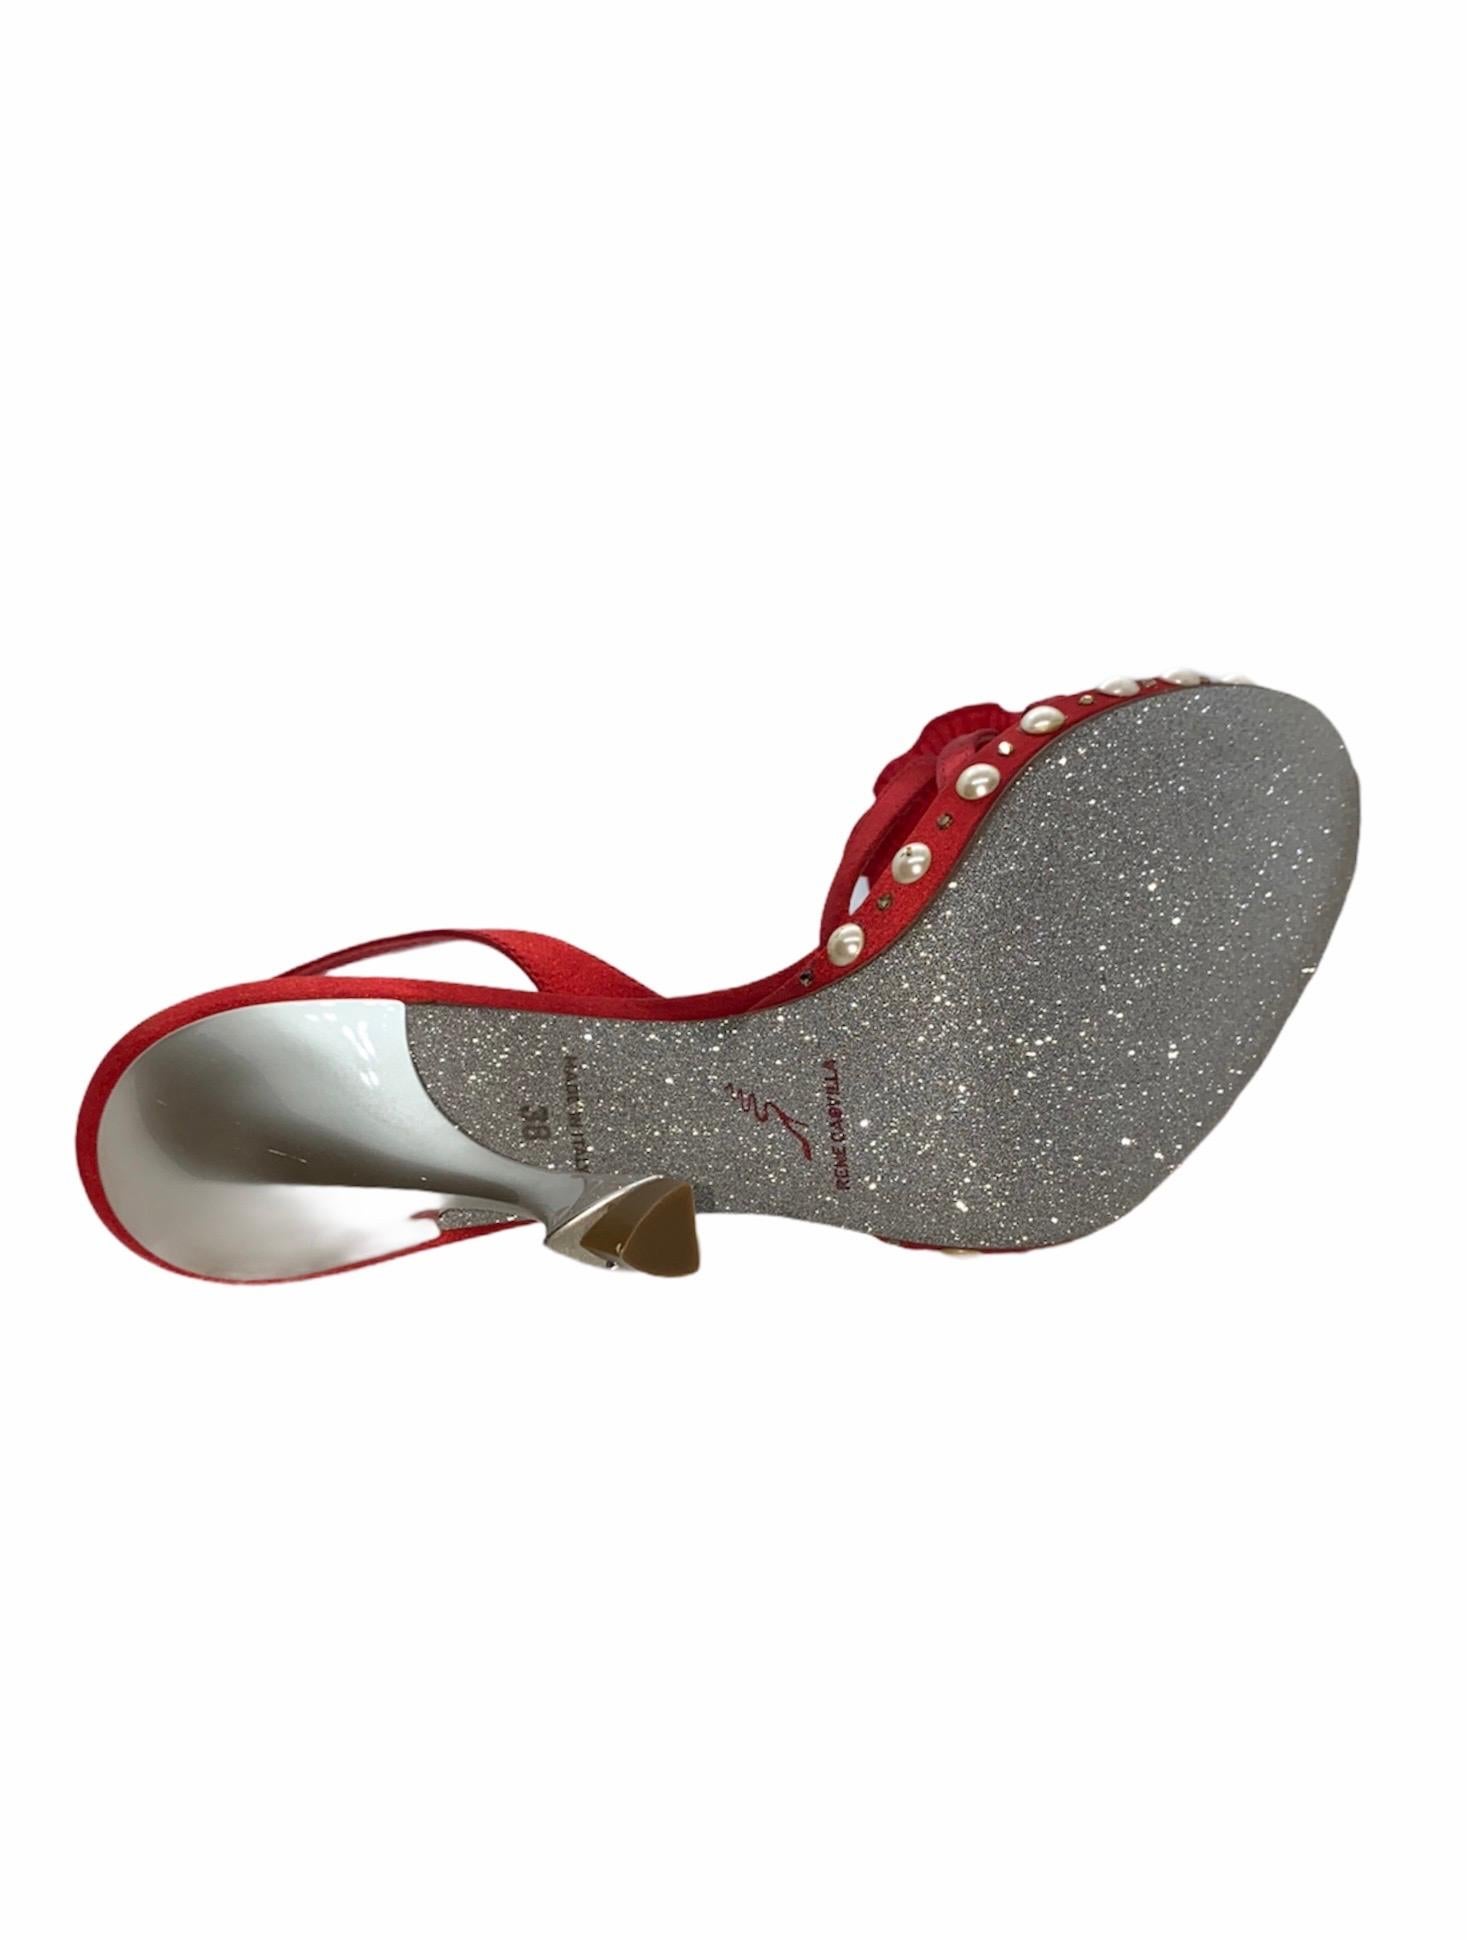     A RENE CAOVILLA classic signature piece that will last you for years
    Pure luxury - handcrafted in their Italian workshop
Beautiful flower detail
Faux pearl details
Beautifully carved heel
    Made in Italy
Size 38 EU
    Complete in RENE